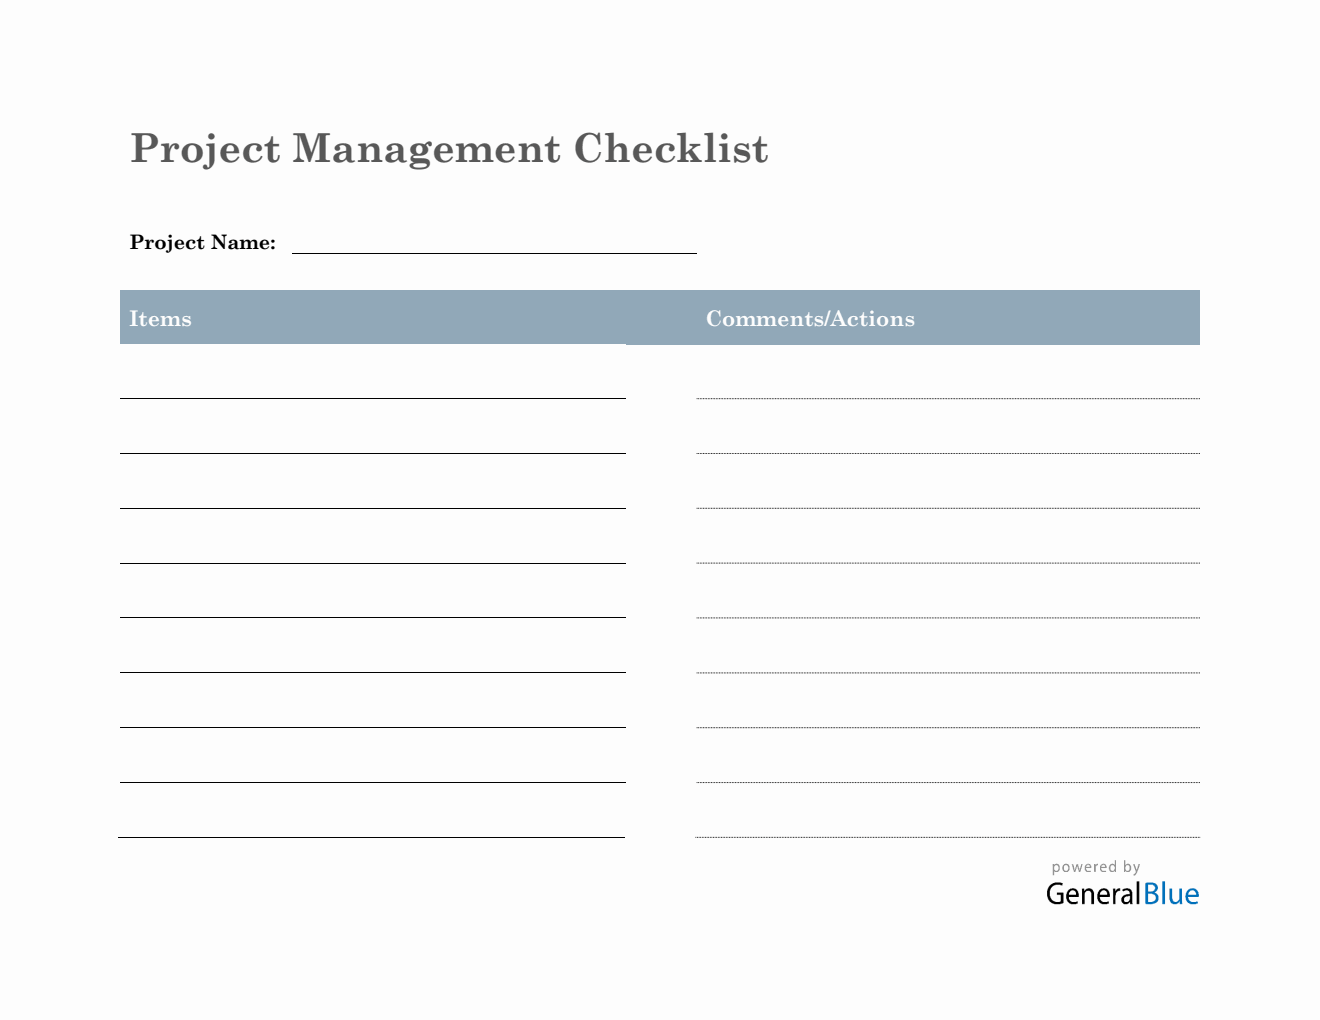 Project Management Checklist in PDF